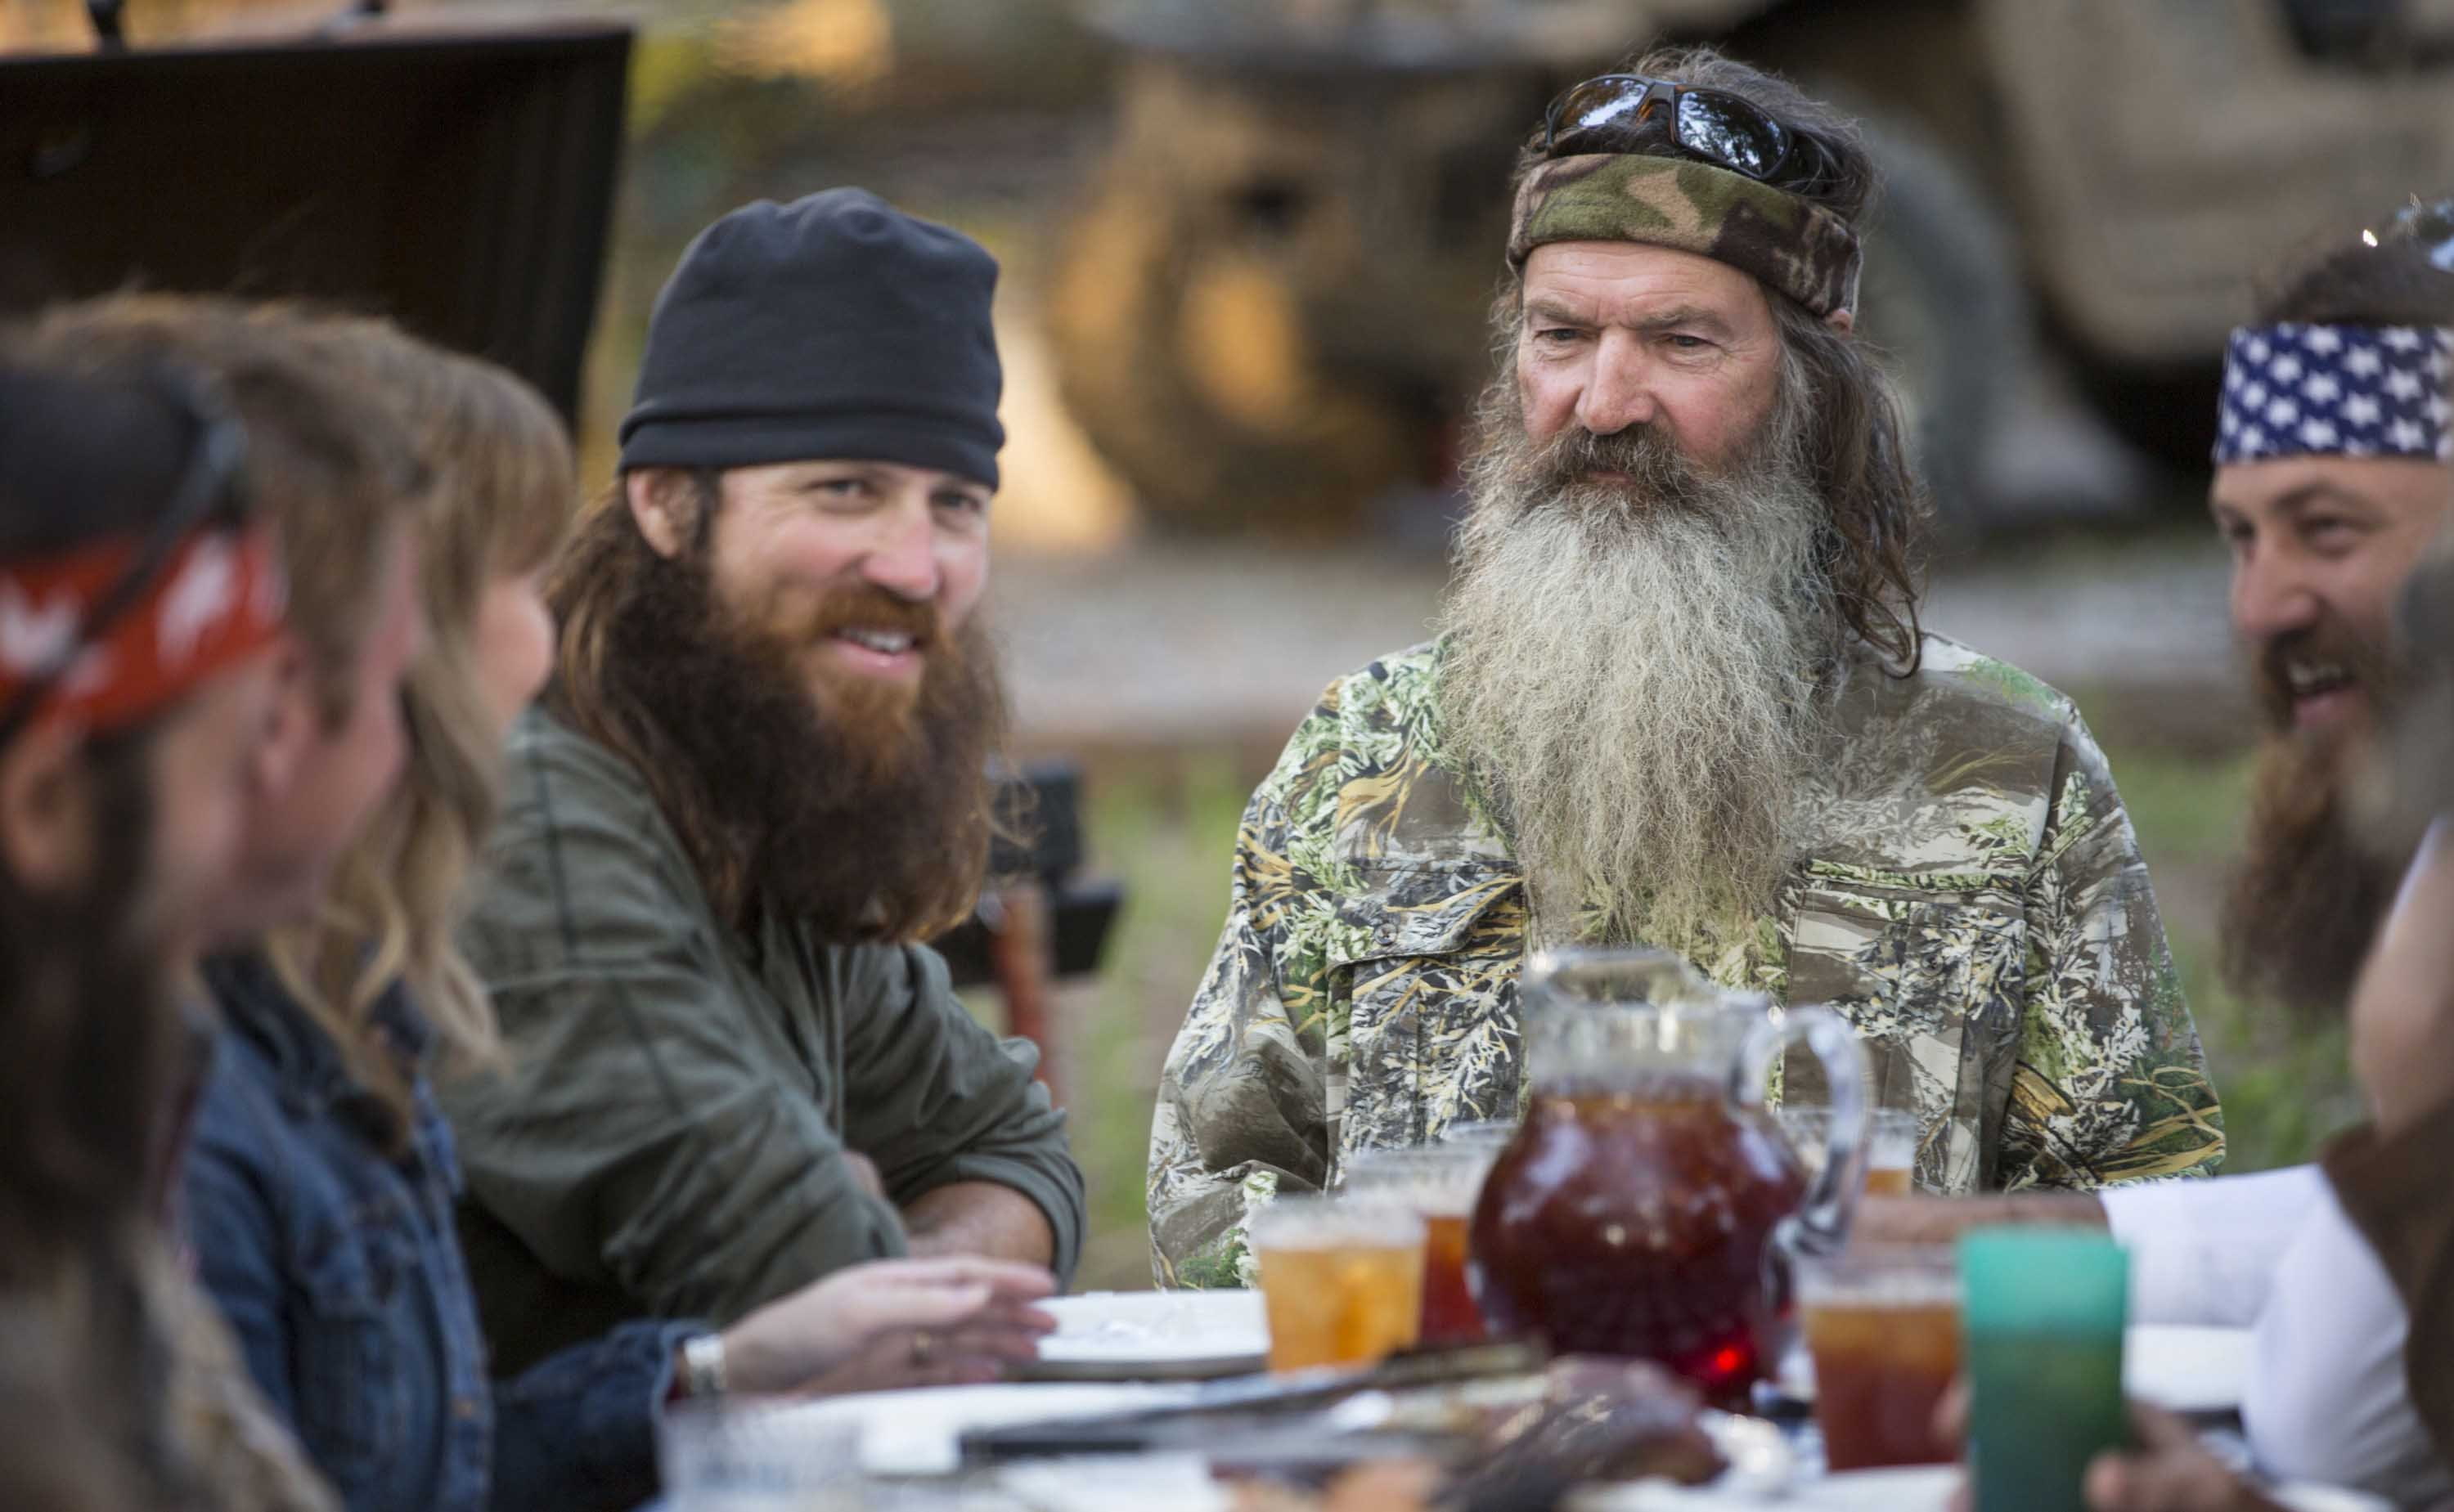 comedy, duck, dynasty, hunting, reality, series